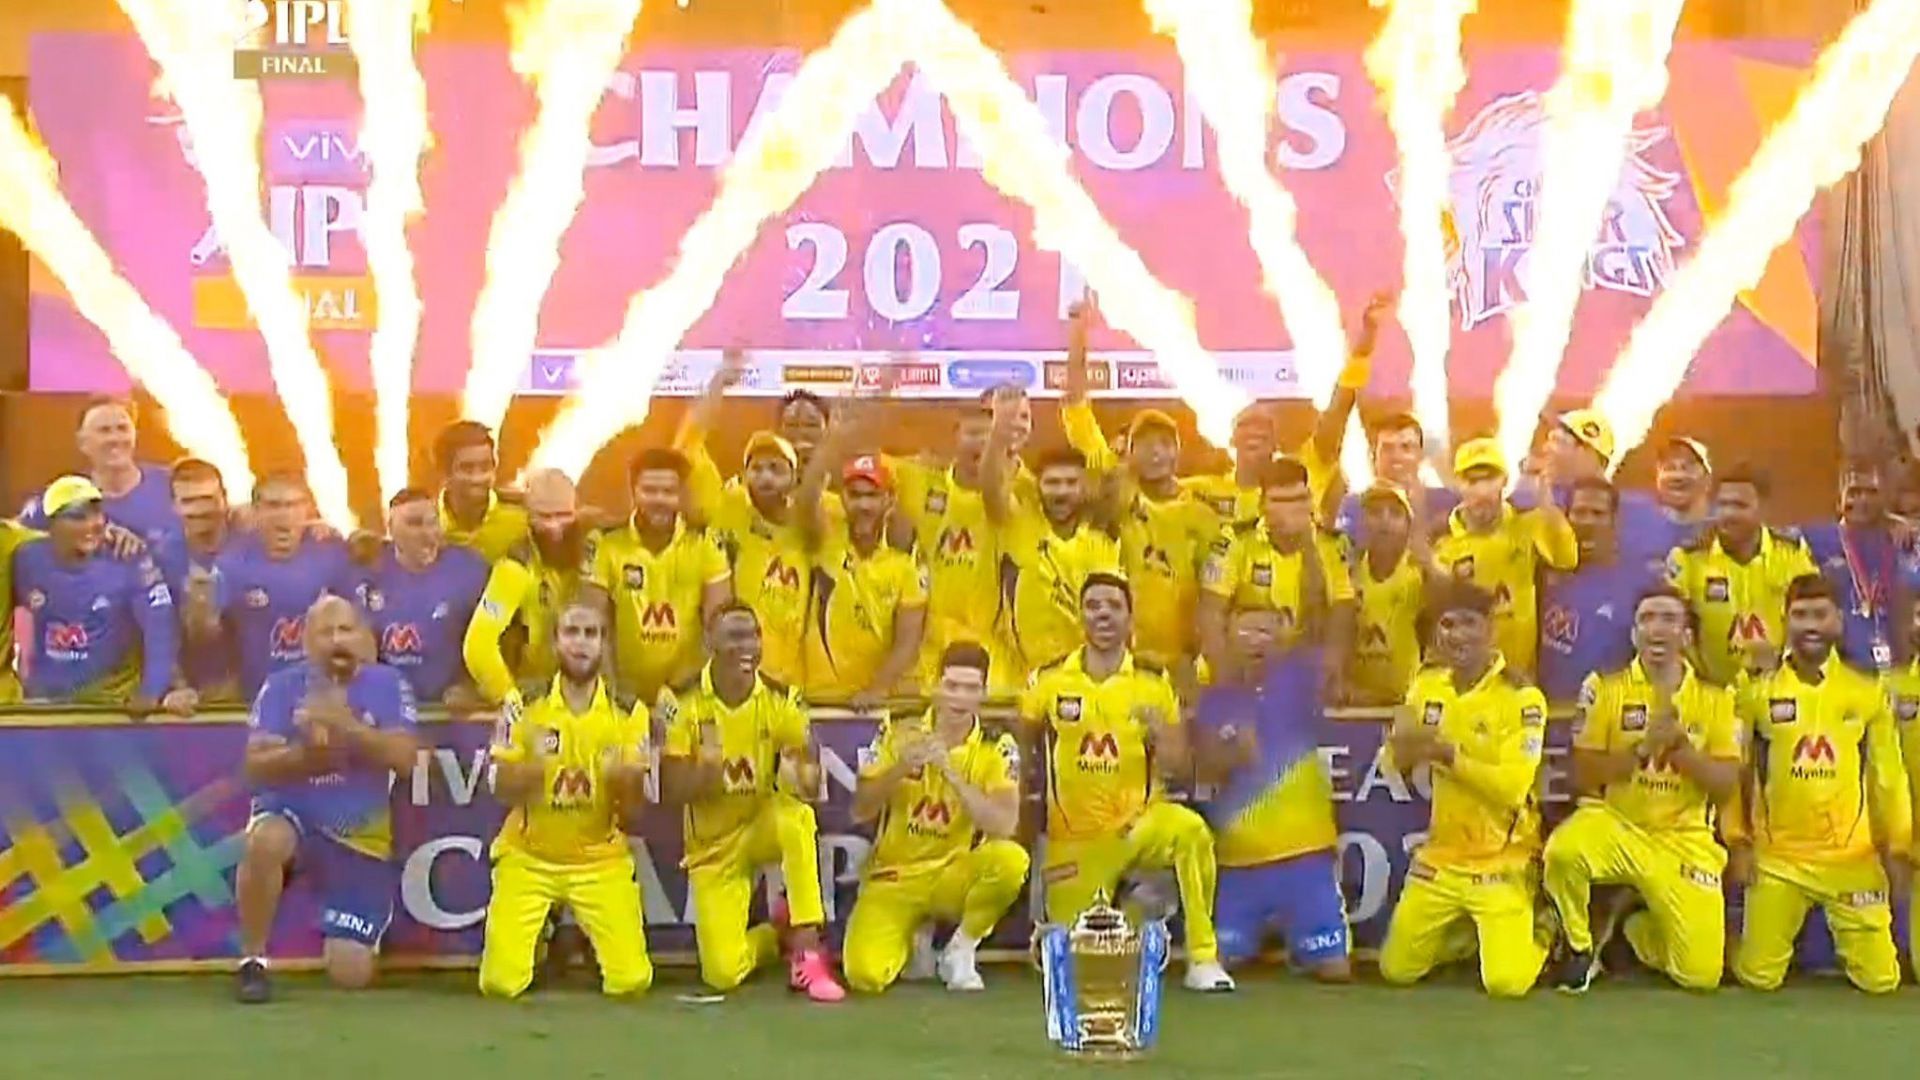 CSK won the coveted IPL Trophy for the fourth time in 2021